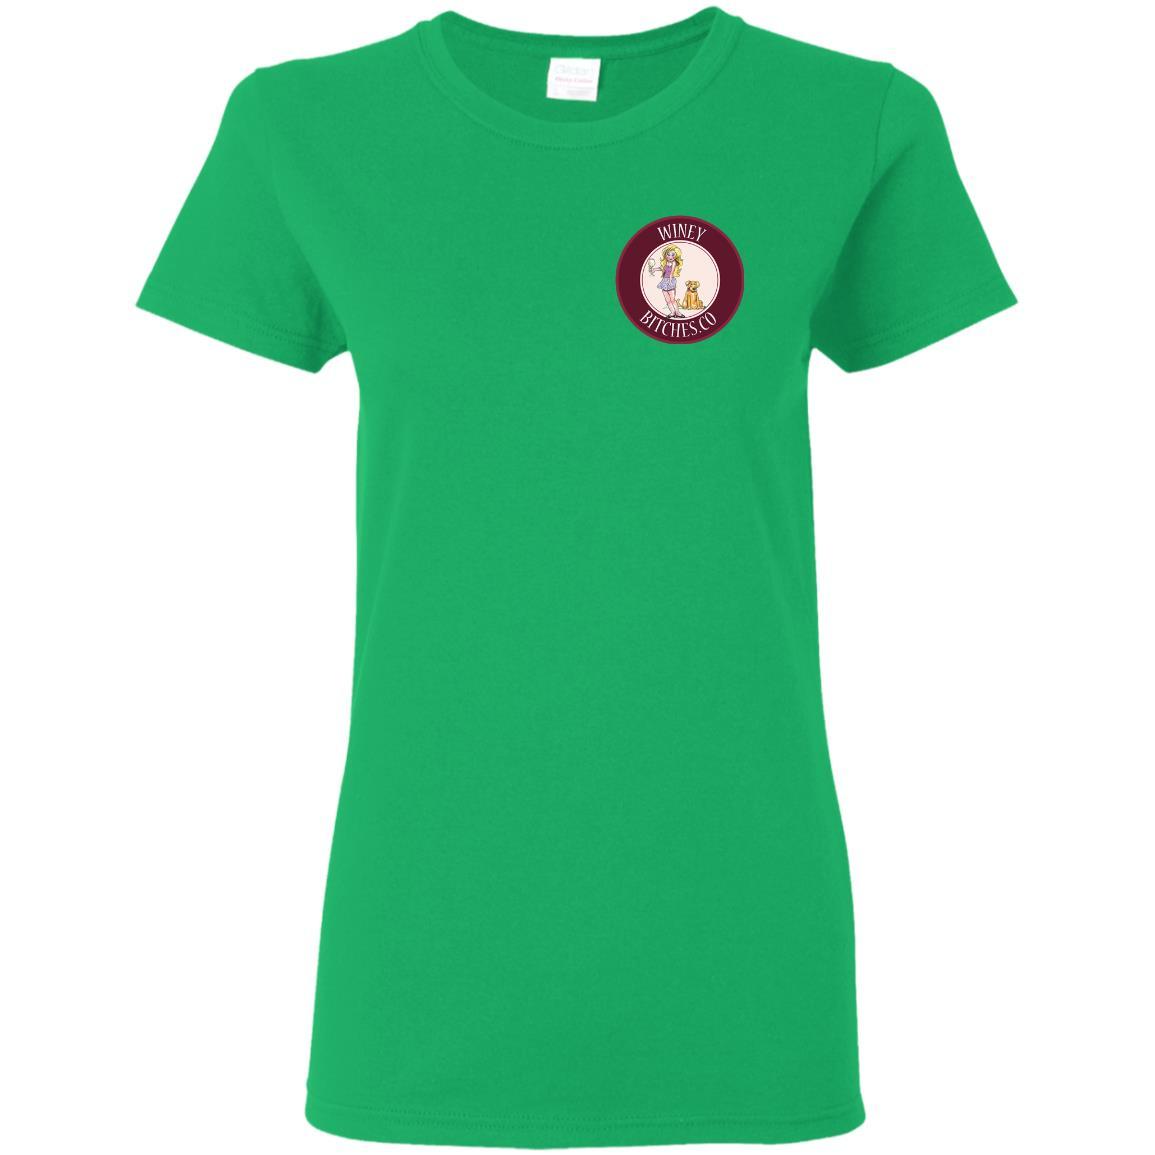 T-Shirts Irish Green / S WineyBitches.co Hilariously Funny "Count Me In" Ladies T-Shirt for Wine & Dog Lovers WineyBitchesCo